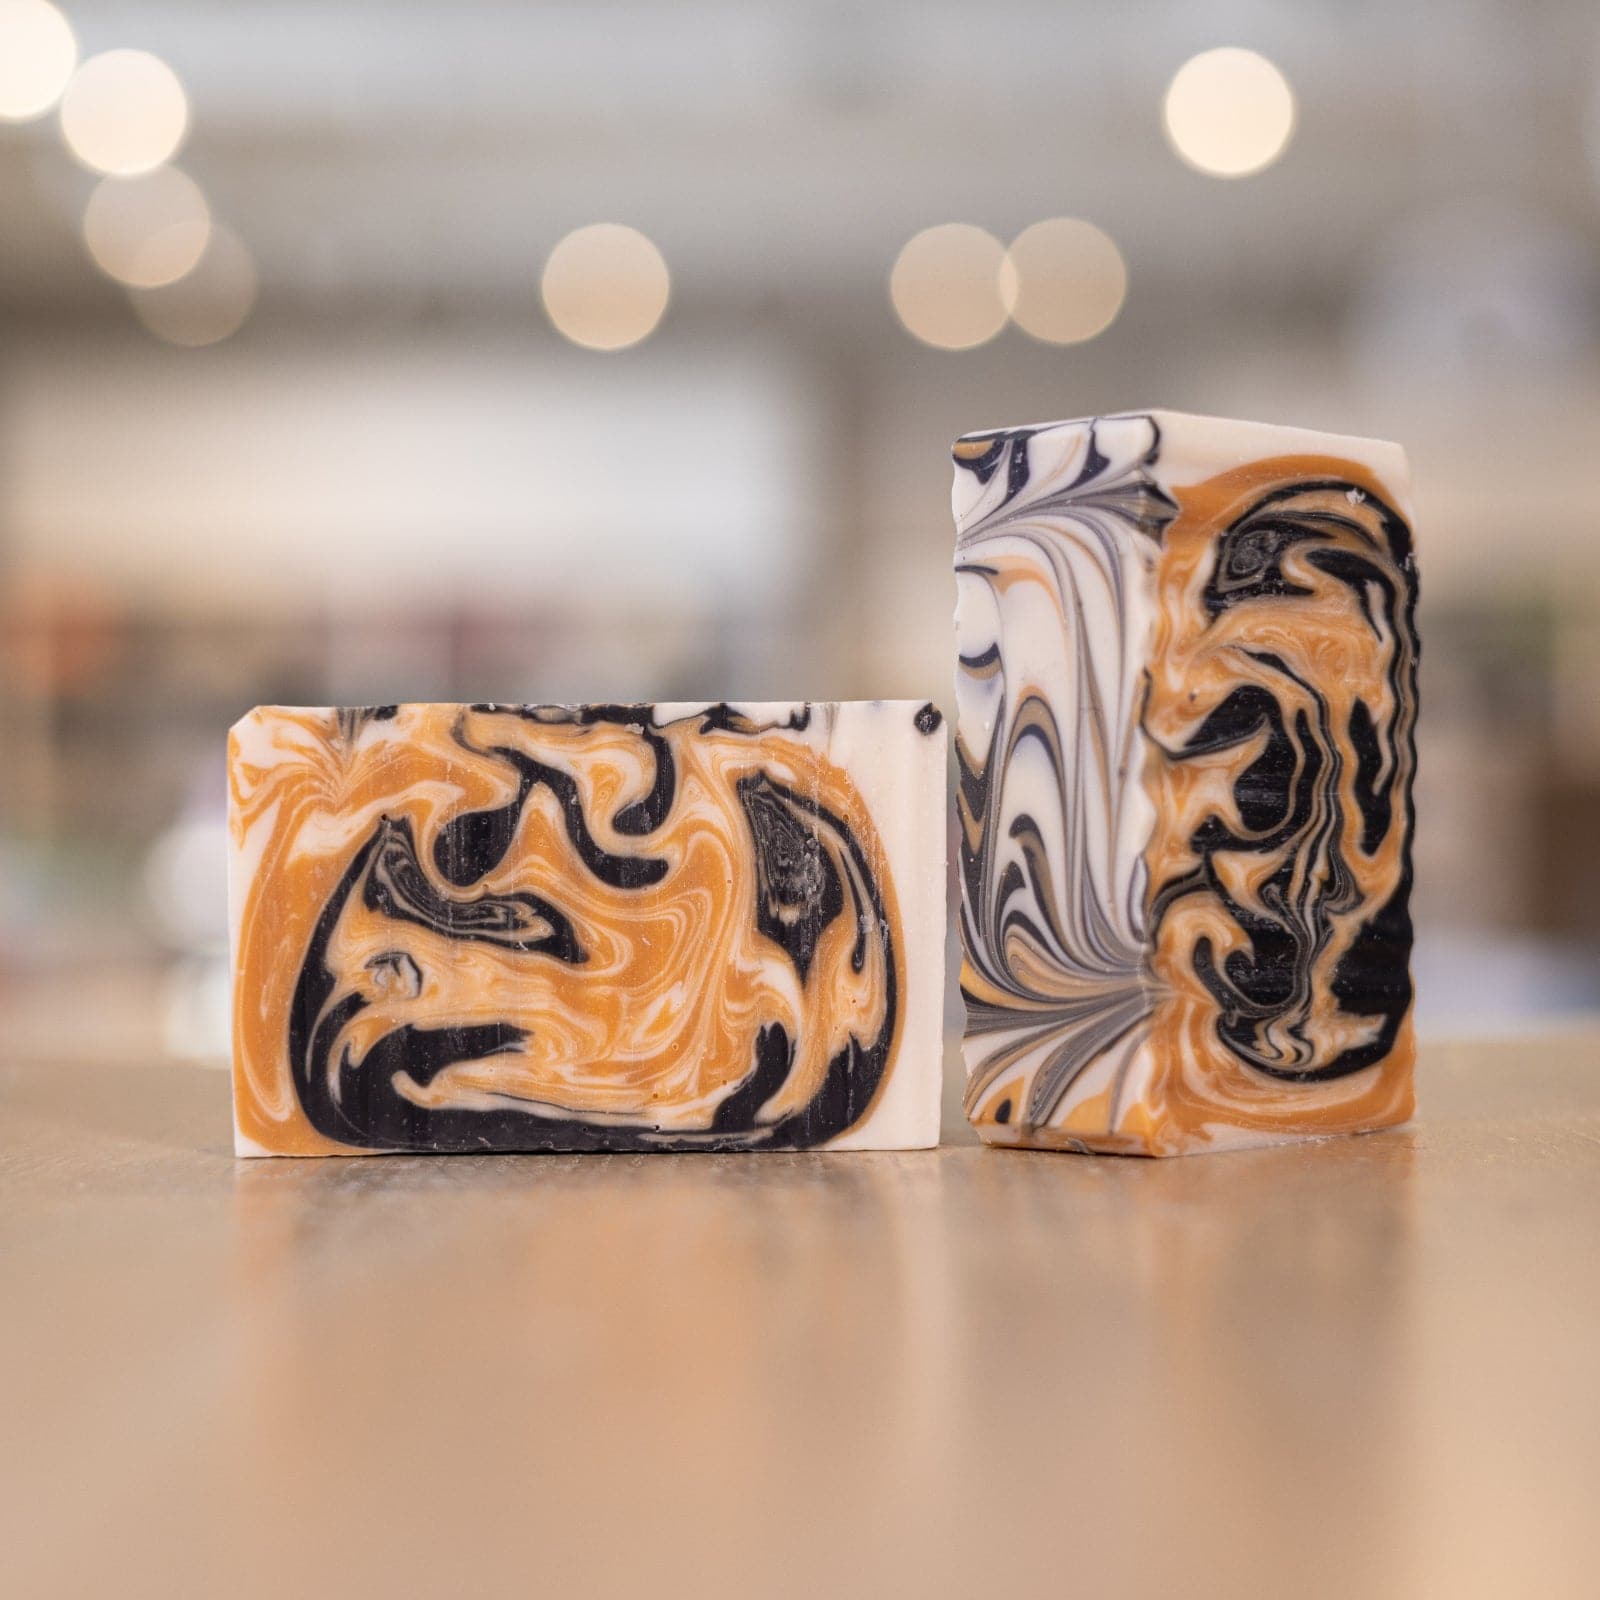 Two Ferocious Beast Soap Bars with white black and tan designs